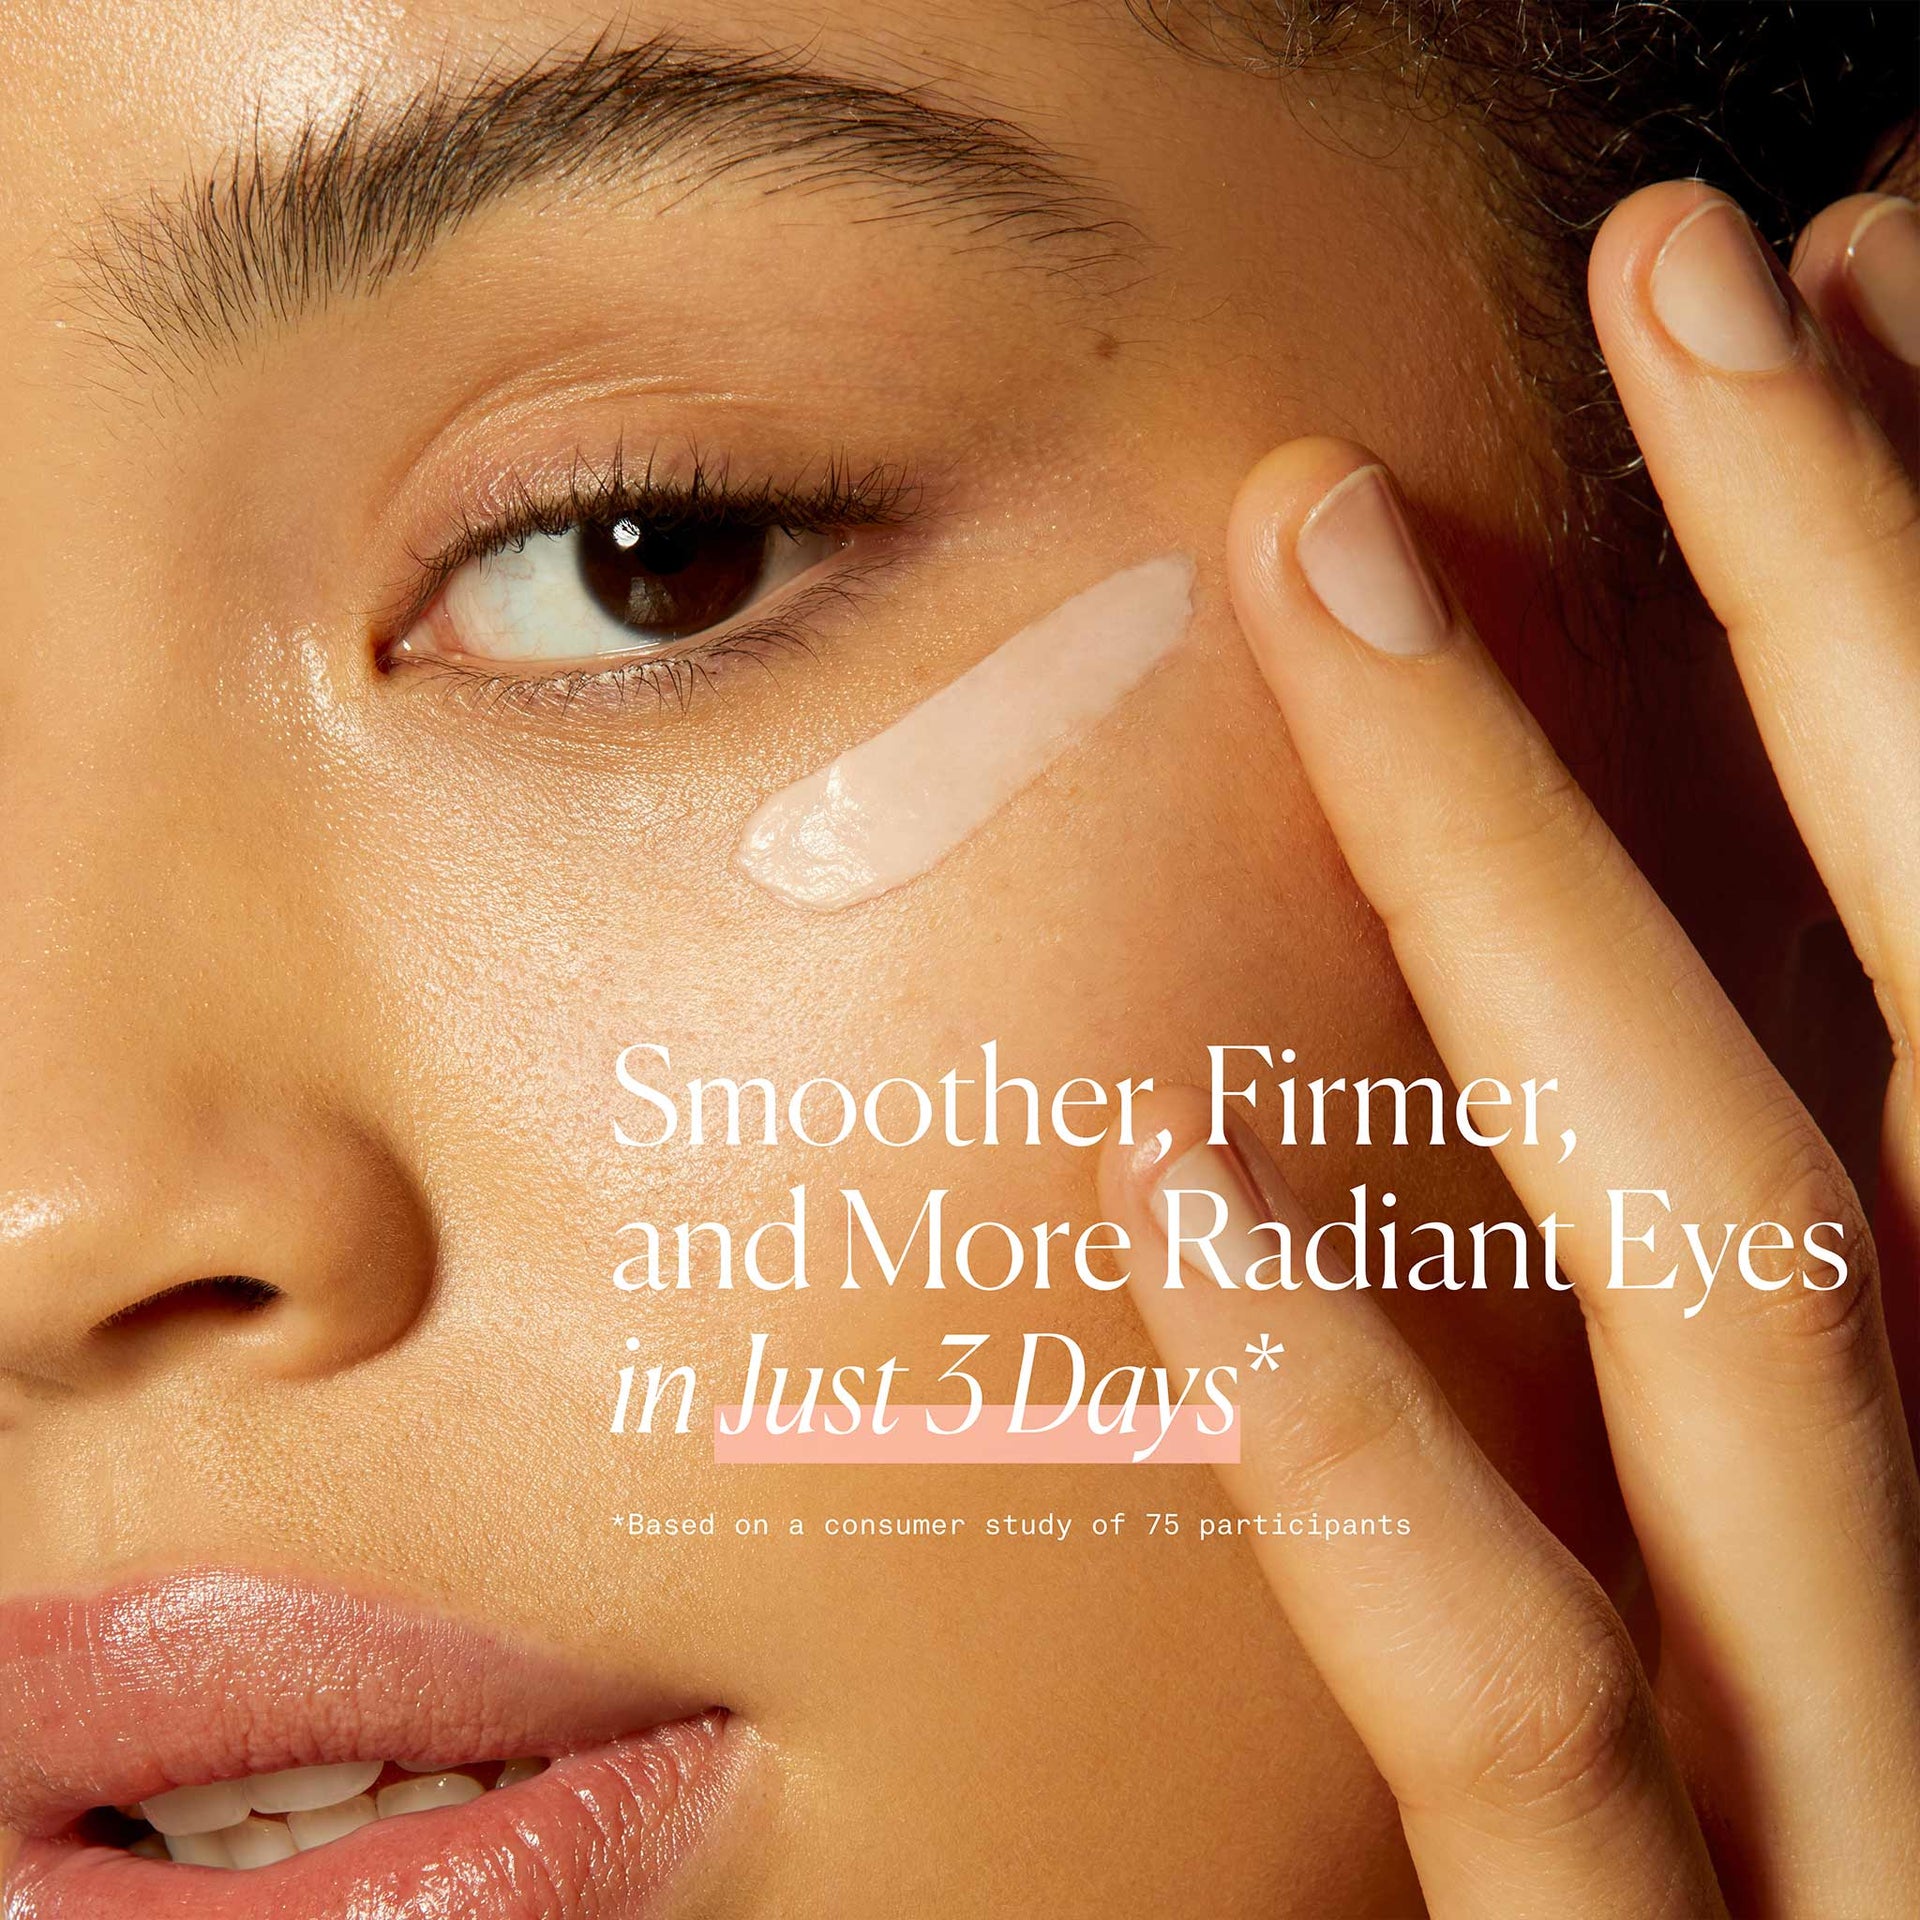 Smoother, firmer and more radiant eyes in just 3 days